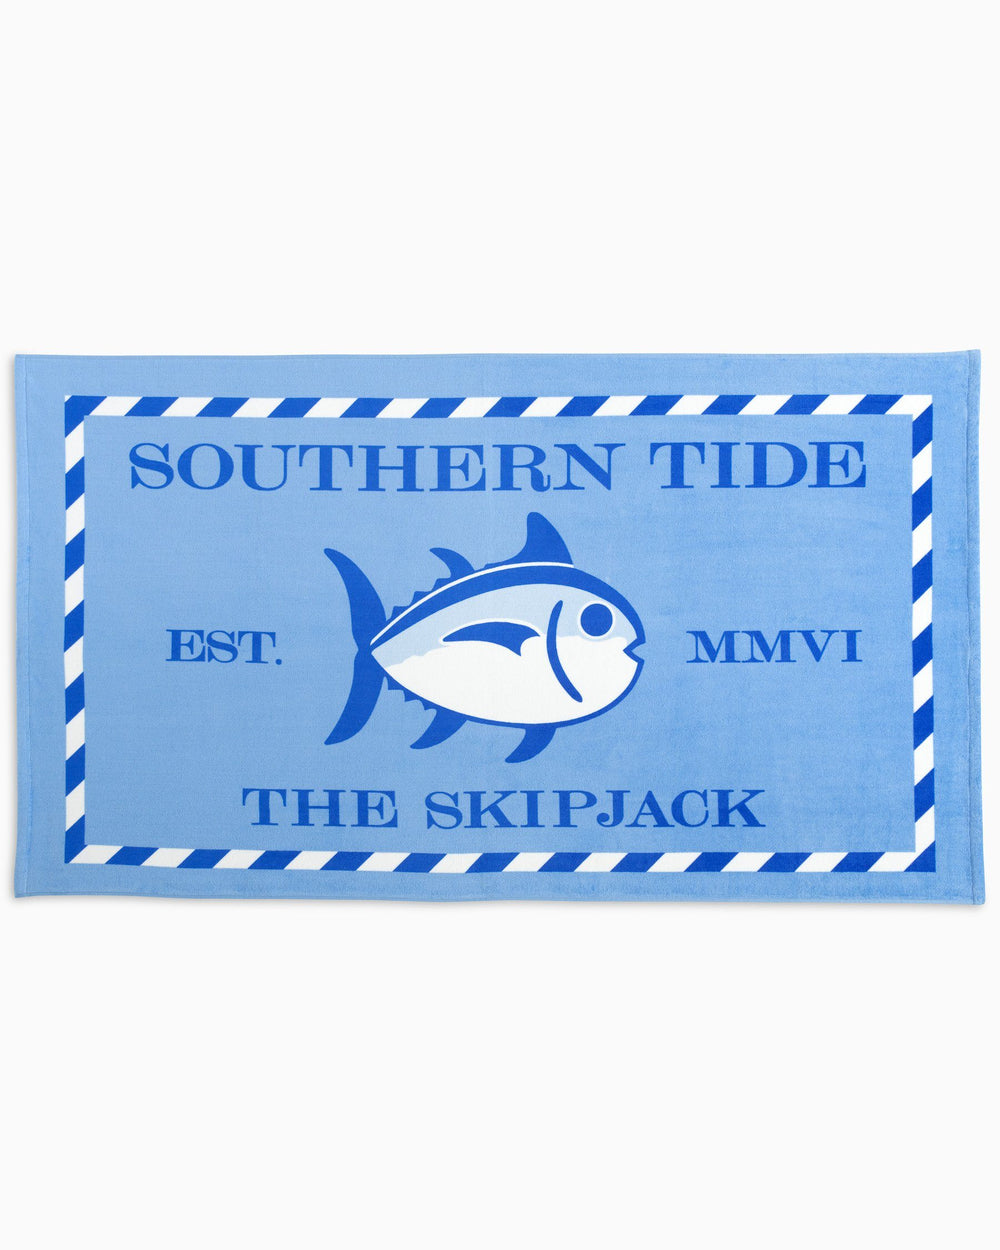 The front view of the Skipjack Beach Towel by Southern Tide - Ocean Channel